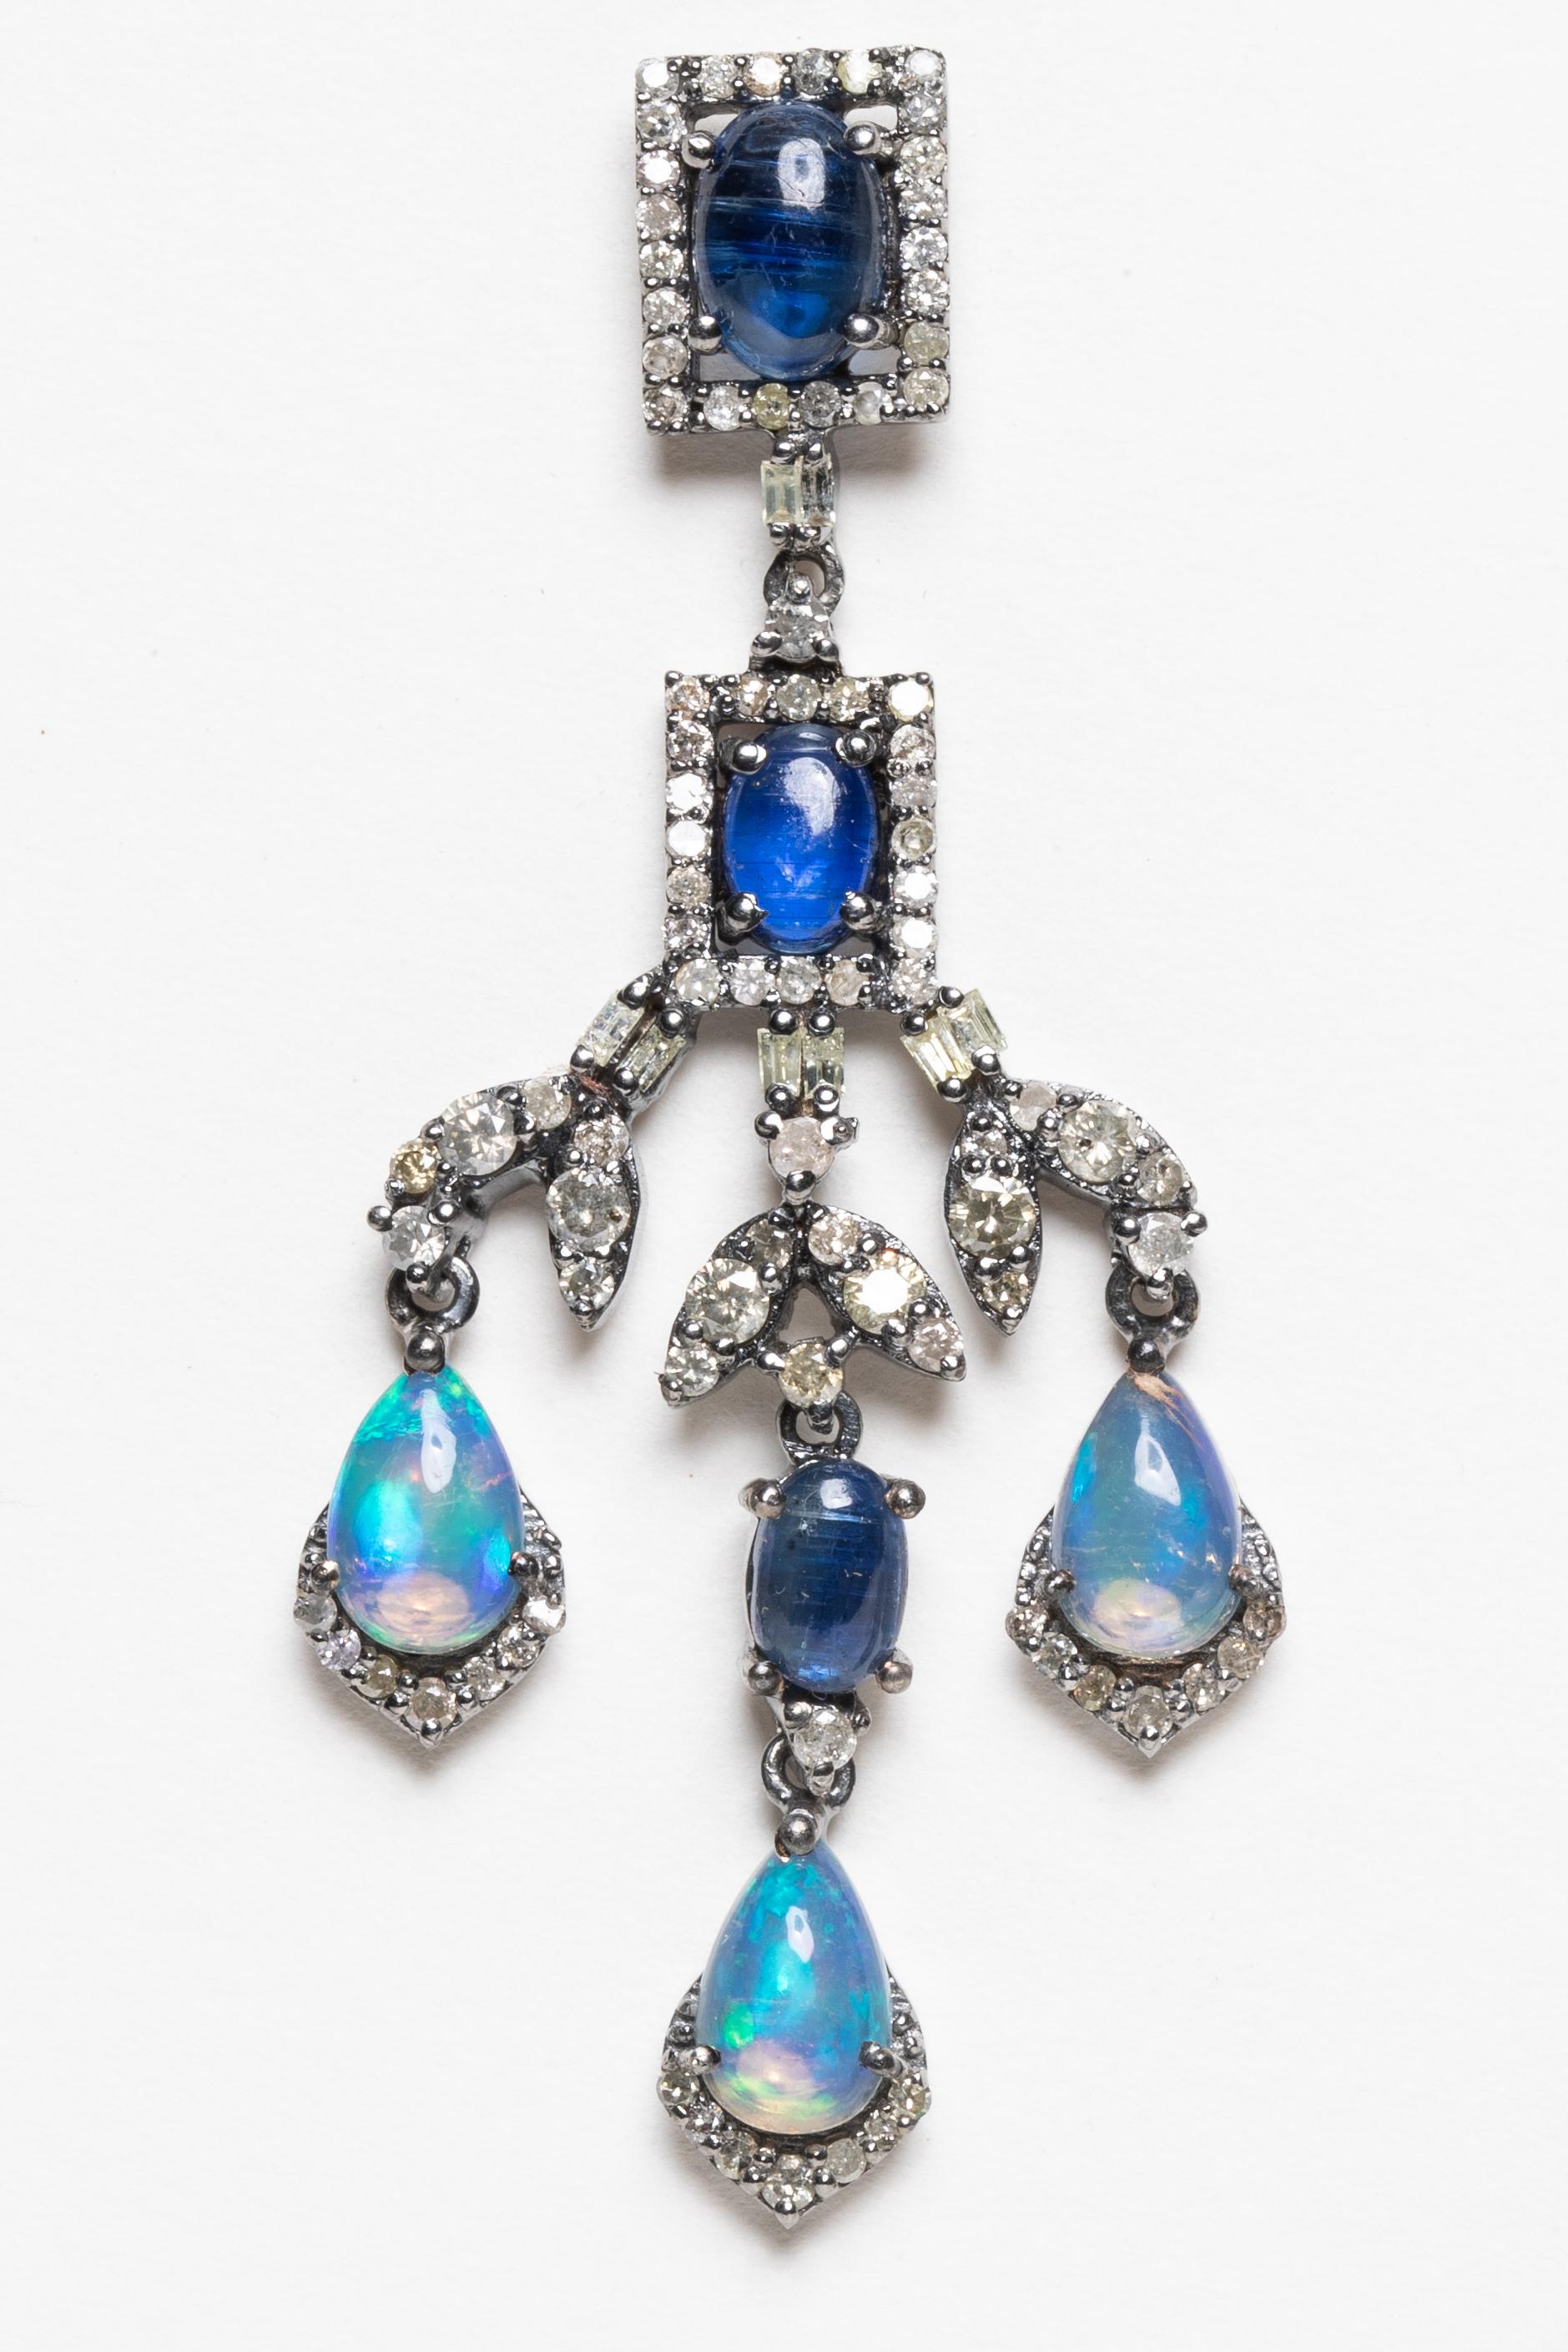 A stunning pair of chandelier earrings with 6 oval, cabochon Kyanite stones, 6 pear-shaped opals and round, brilliant cut diamonds throughout the setting.  Set in sterling silver with 18K gold posts for pierced ears.  Carat weight of diamonds is